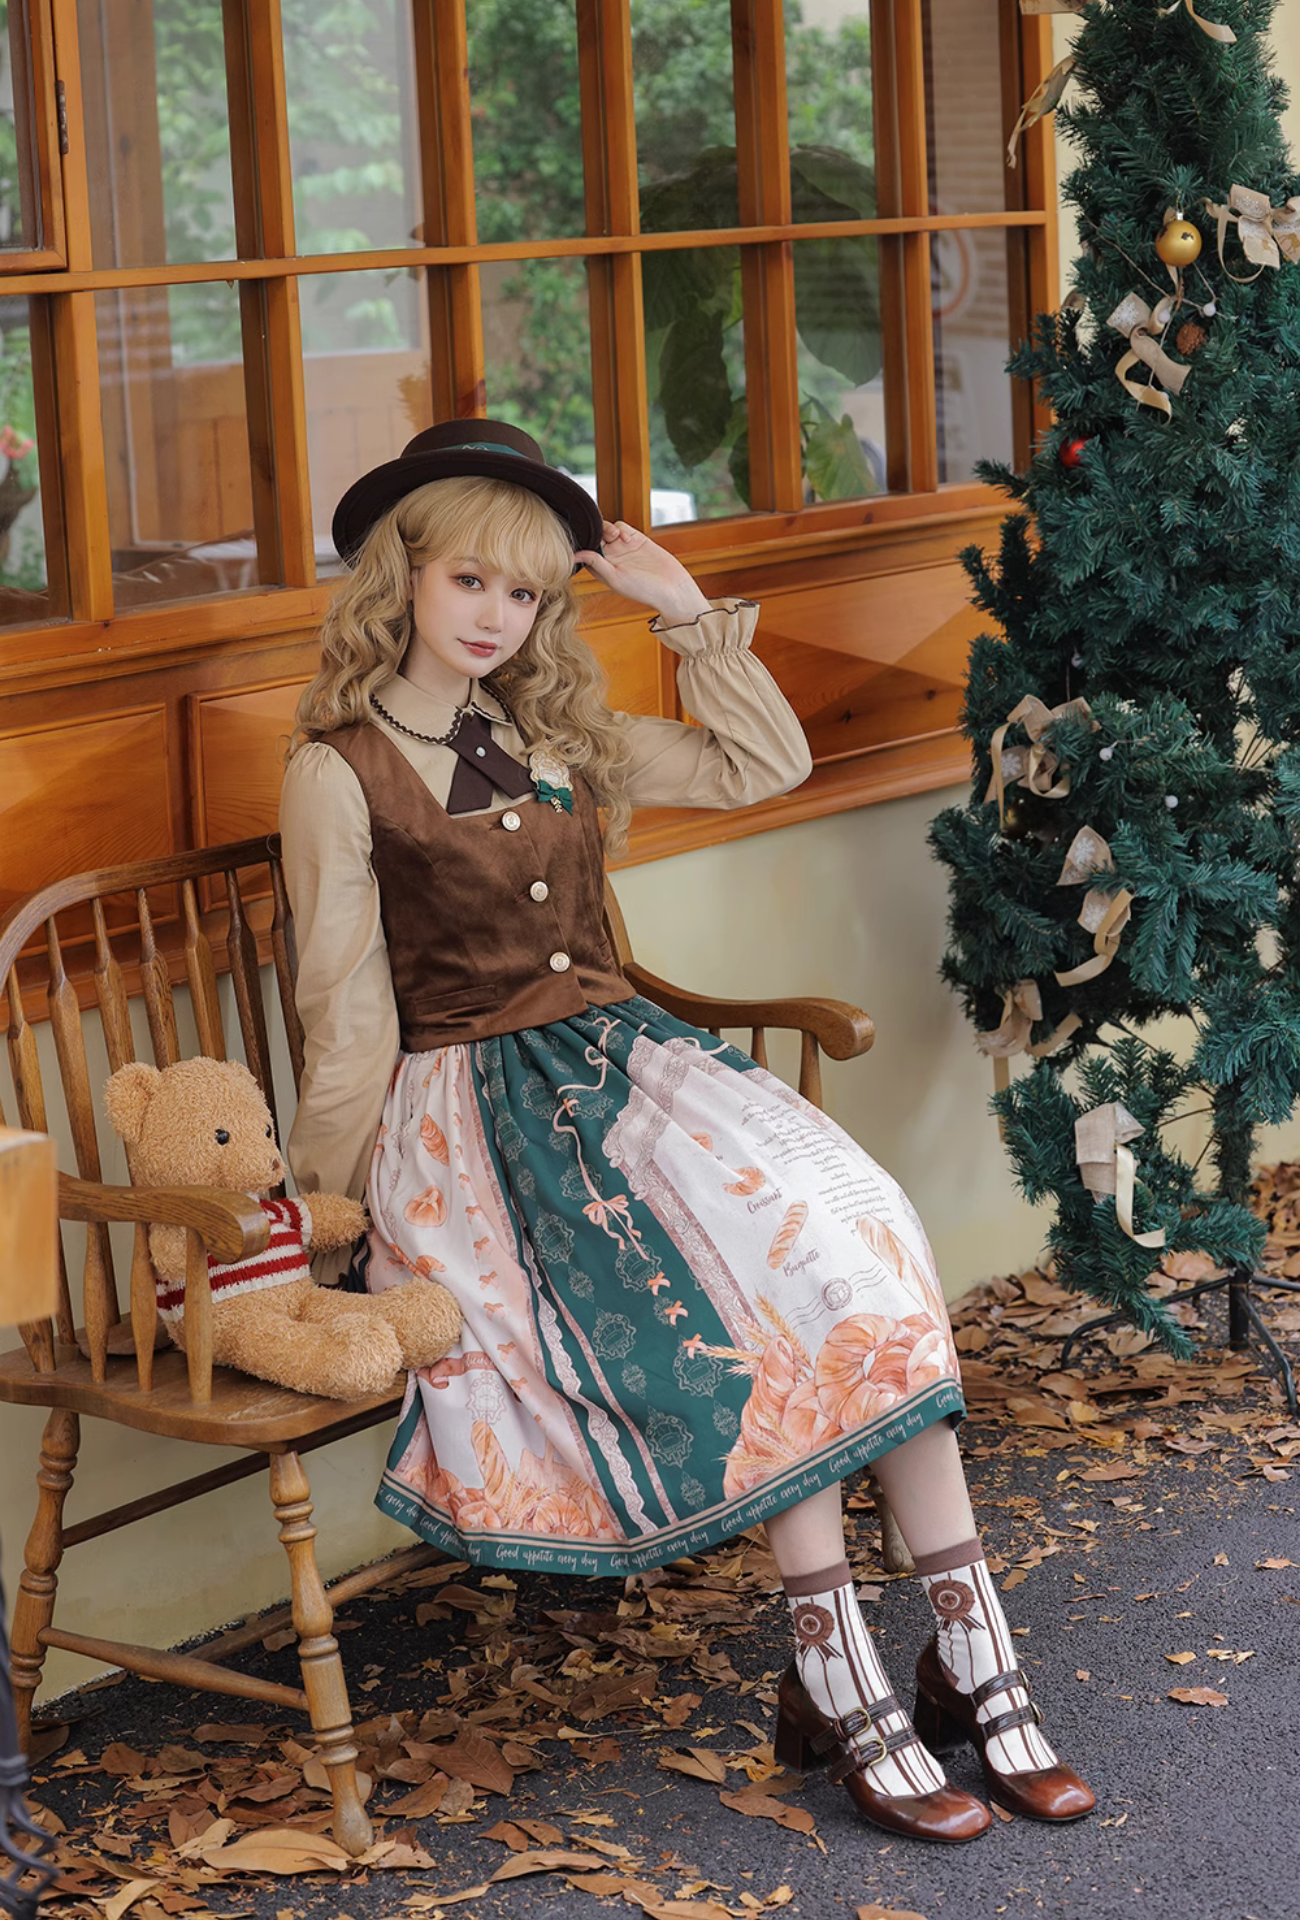 Bread morning 2way suspender skirt with bread and ribbon